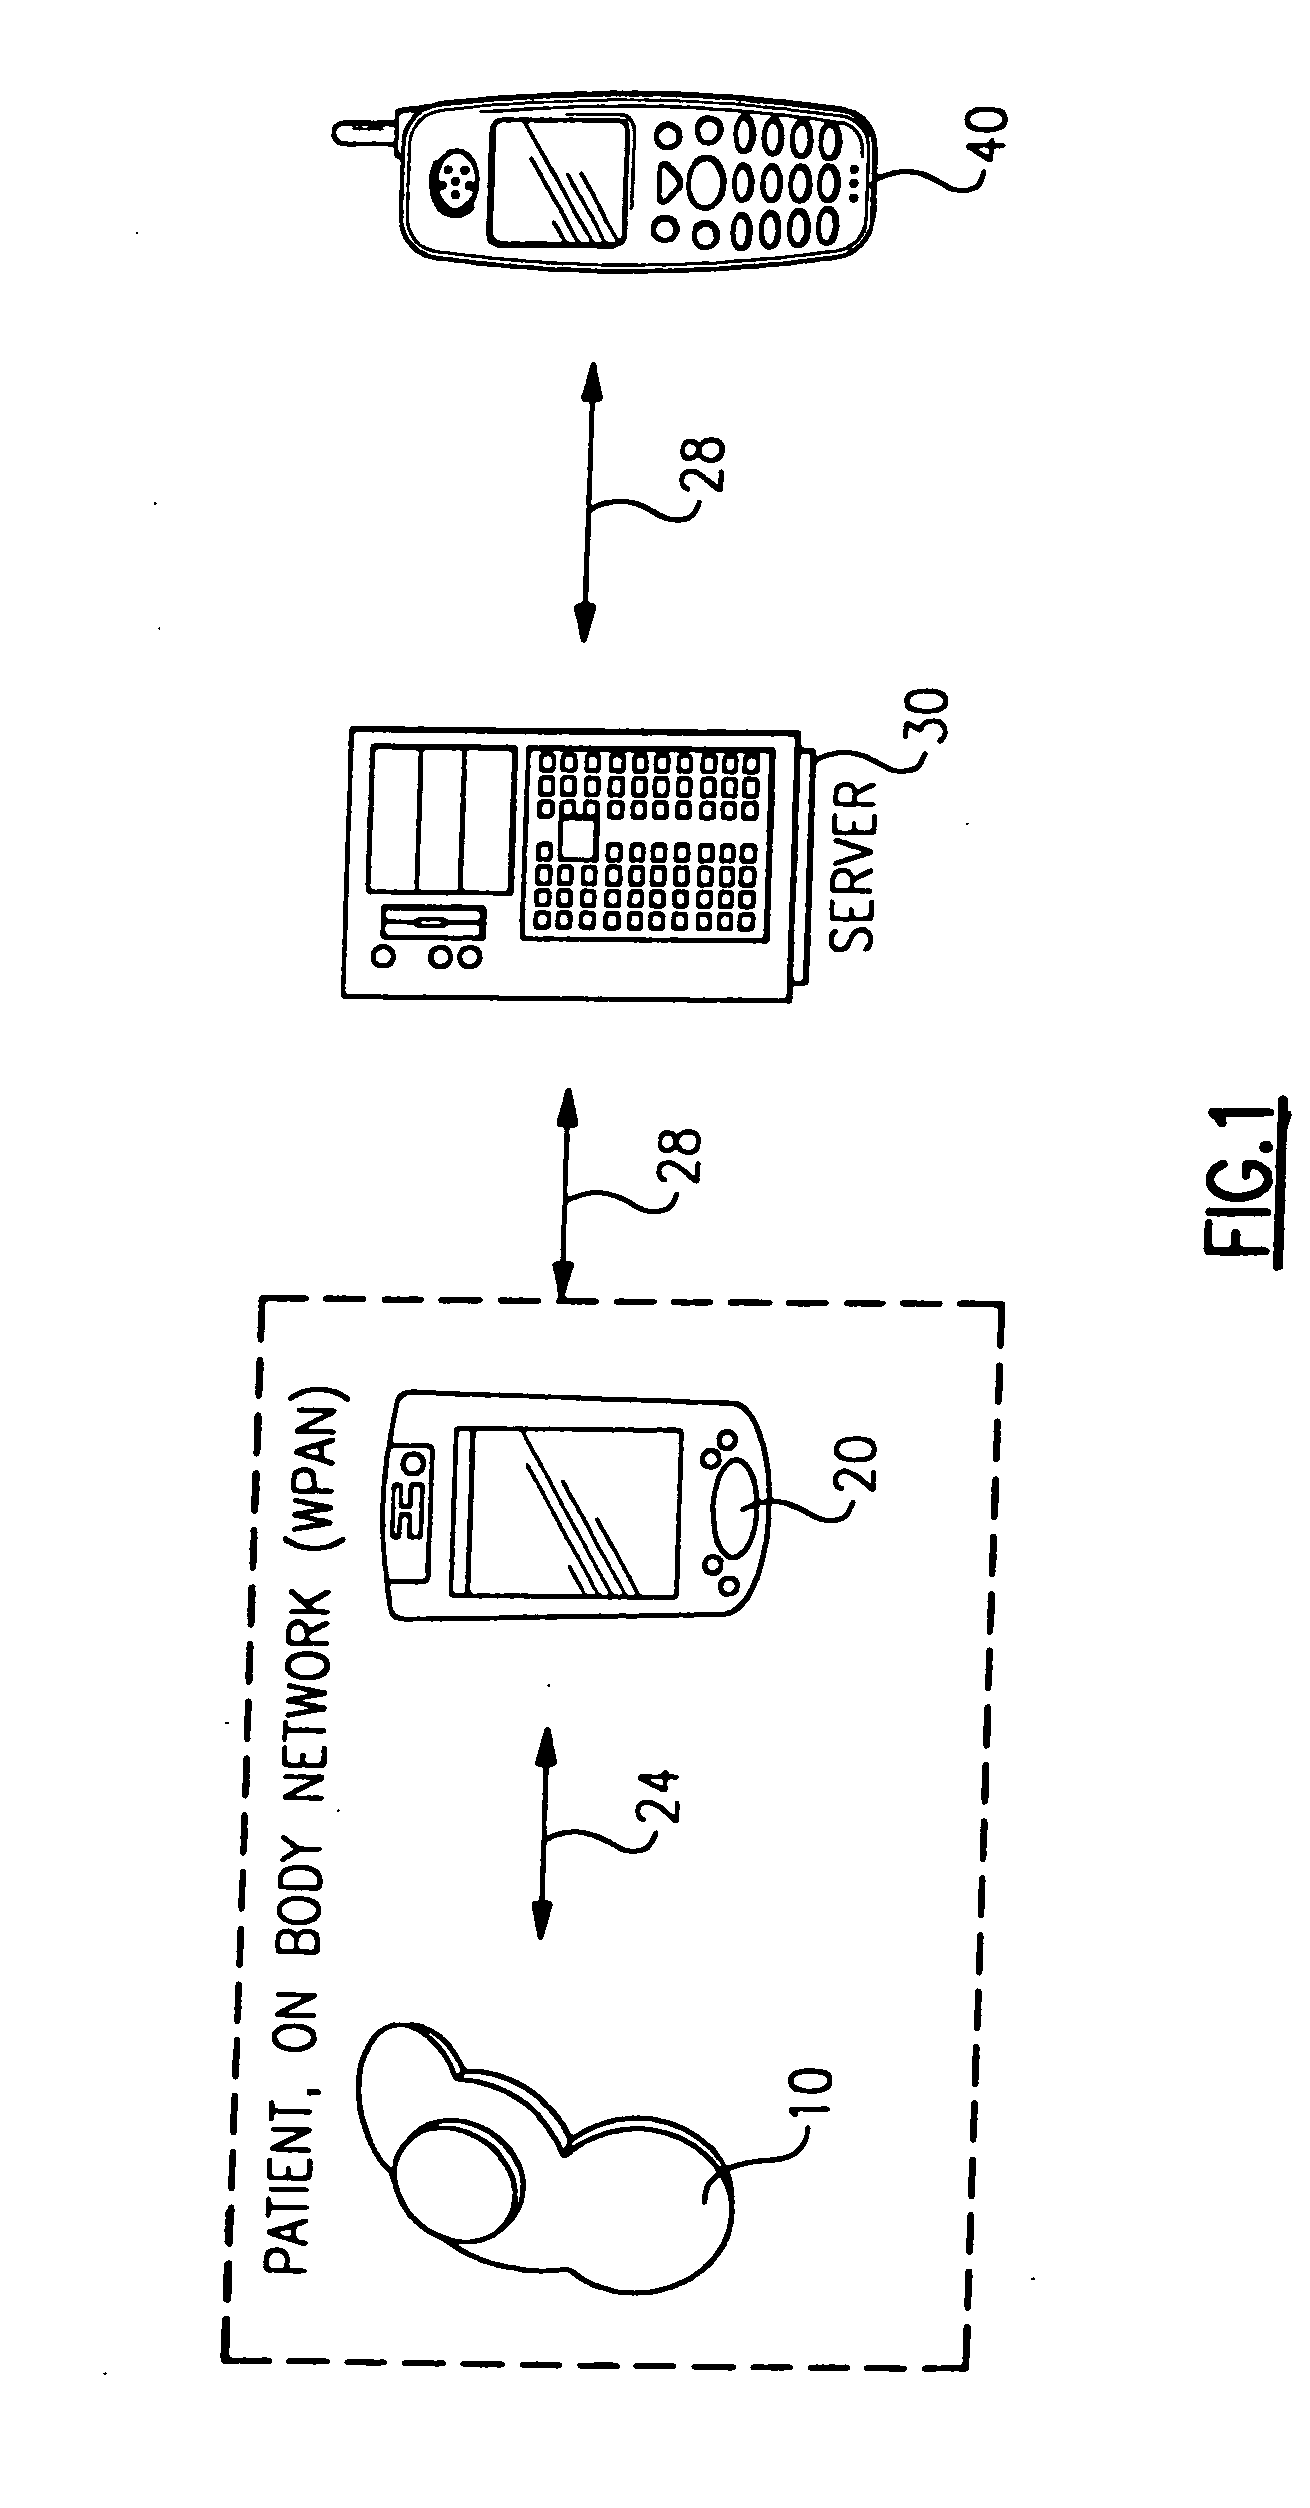 Personal status physiologic monitor system and architecture and related monitoring methods